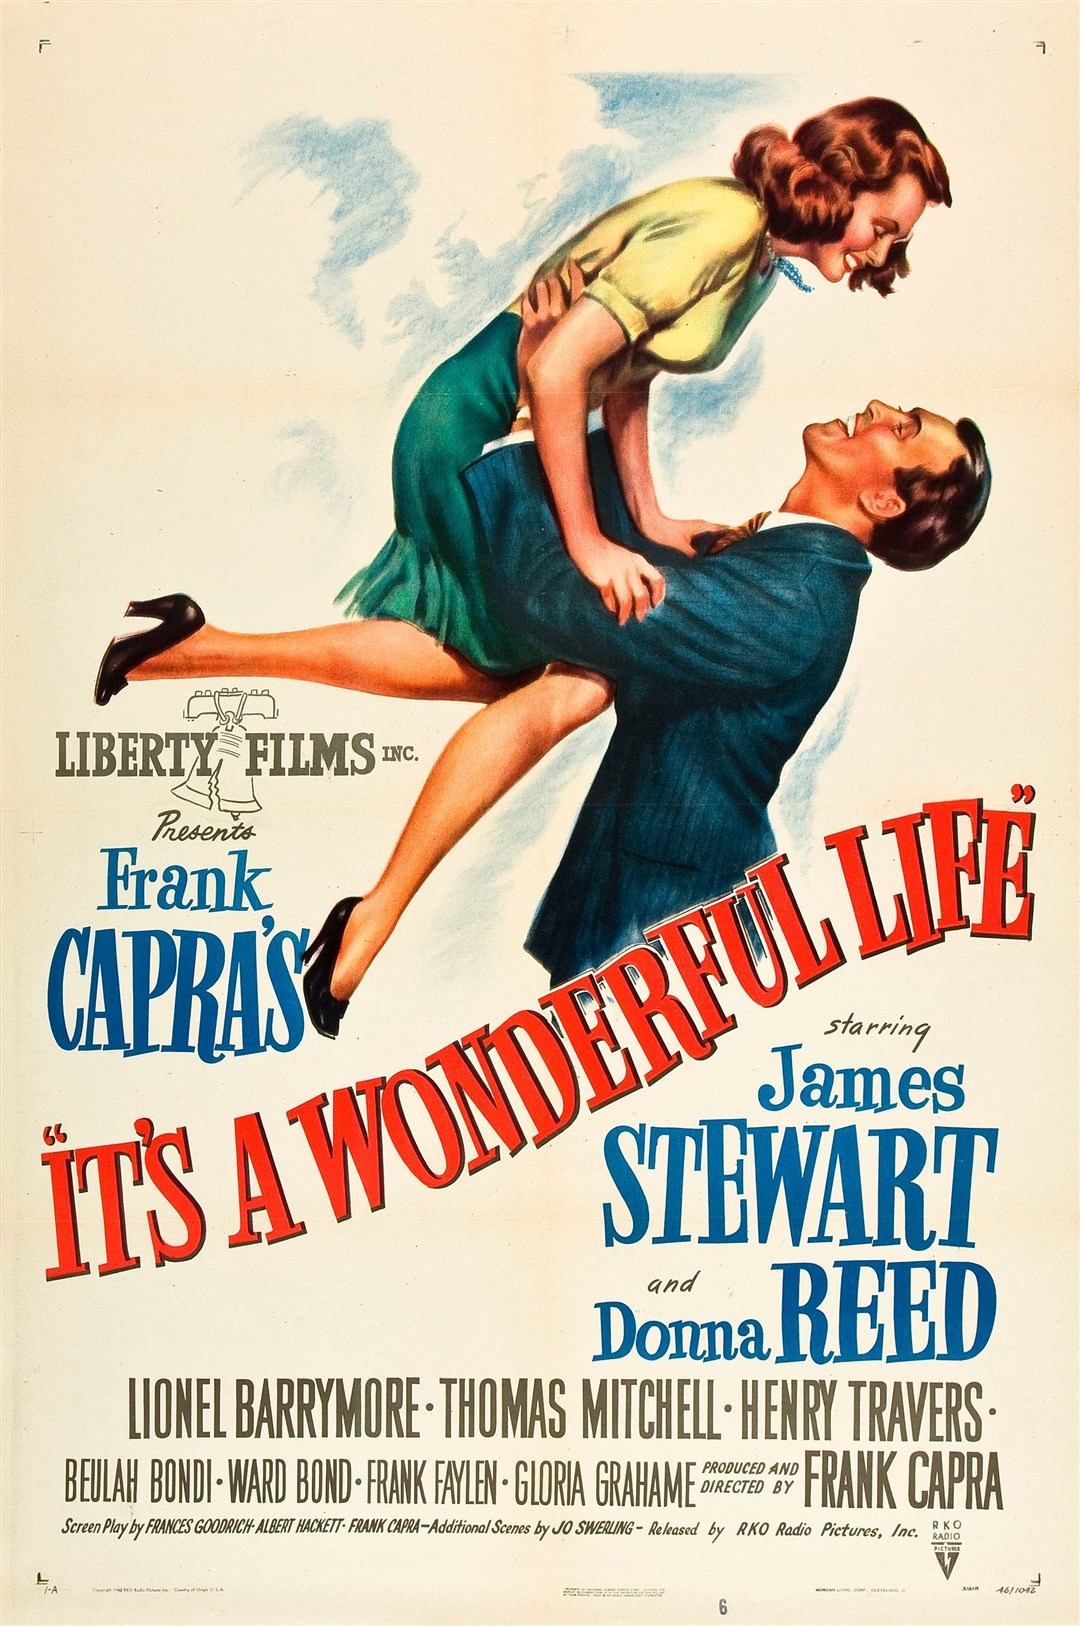 The original poster for the film.